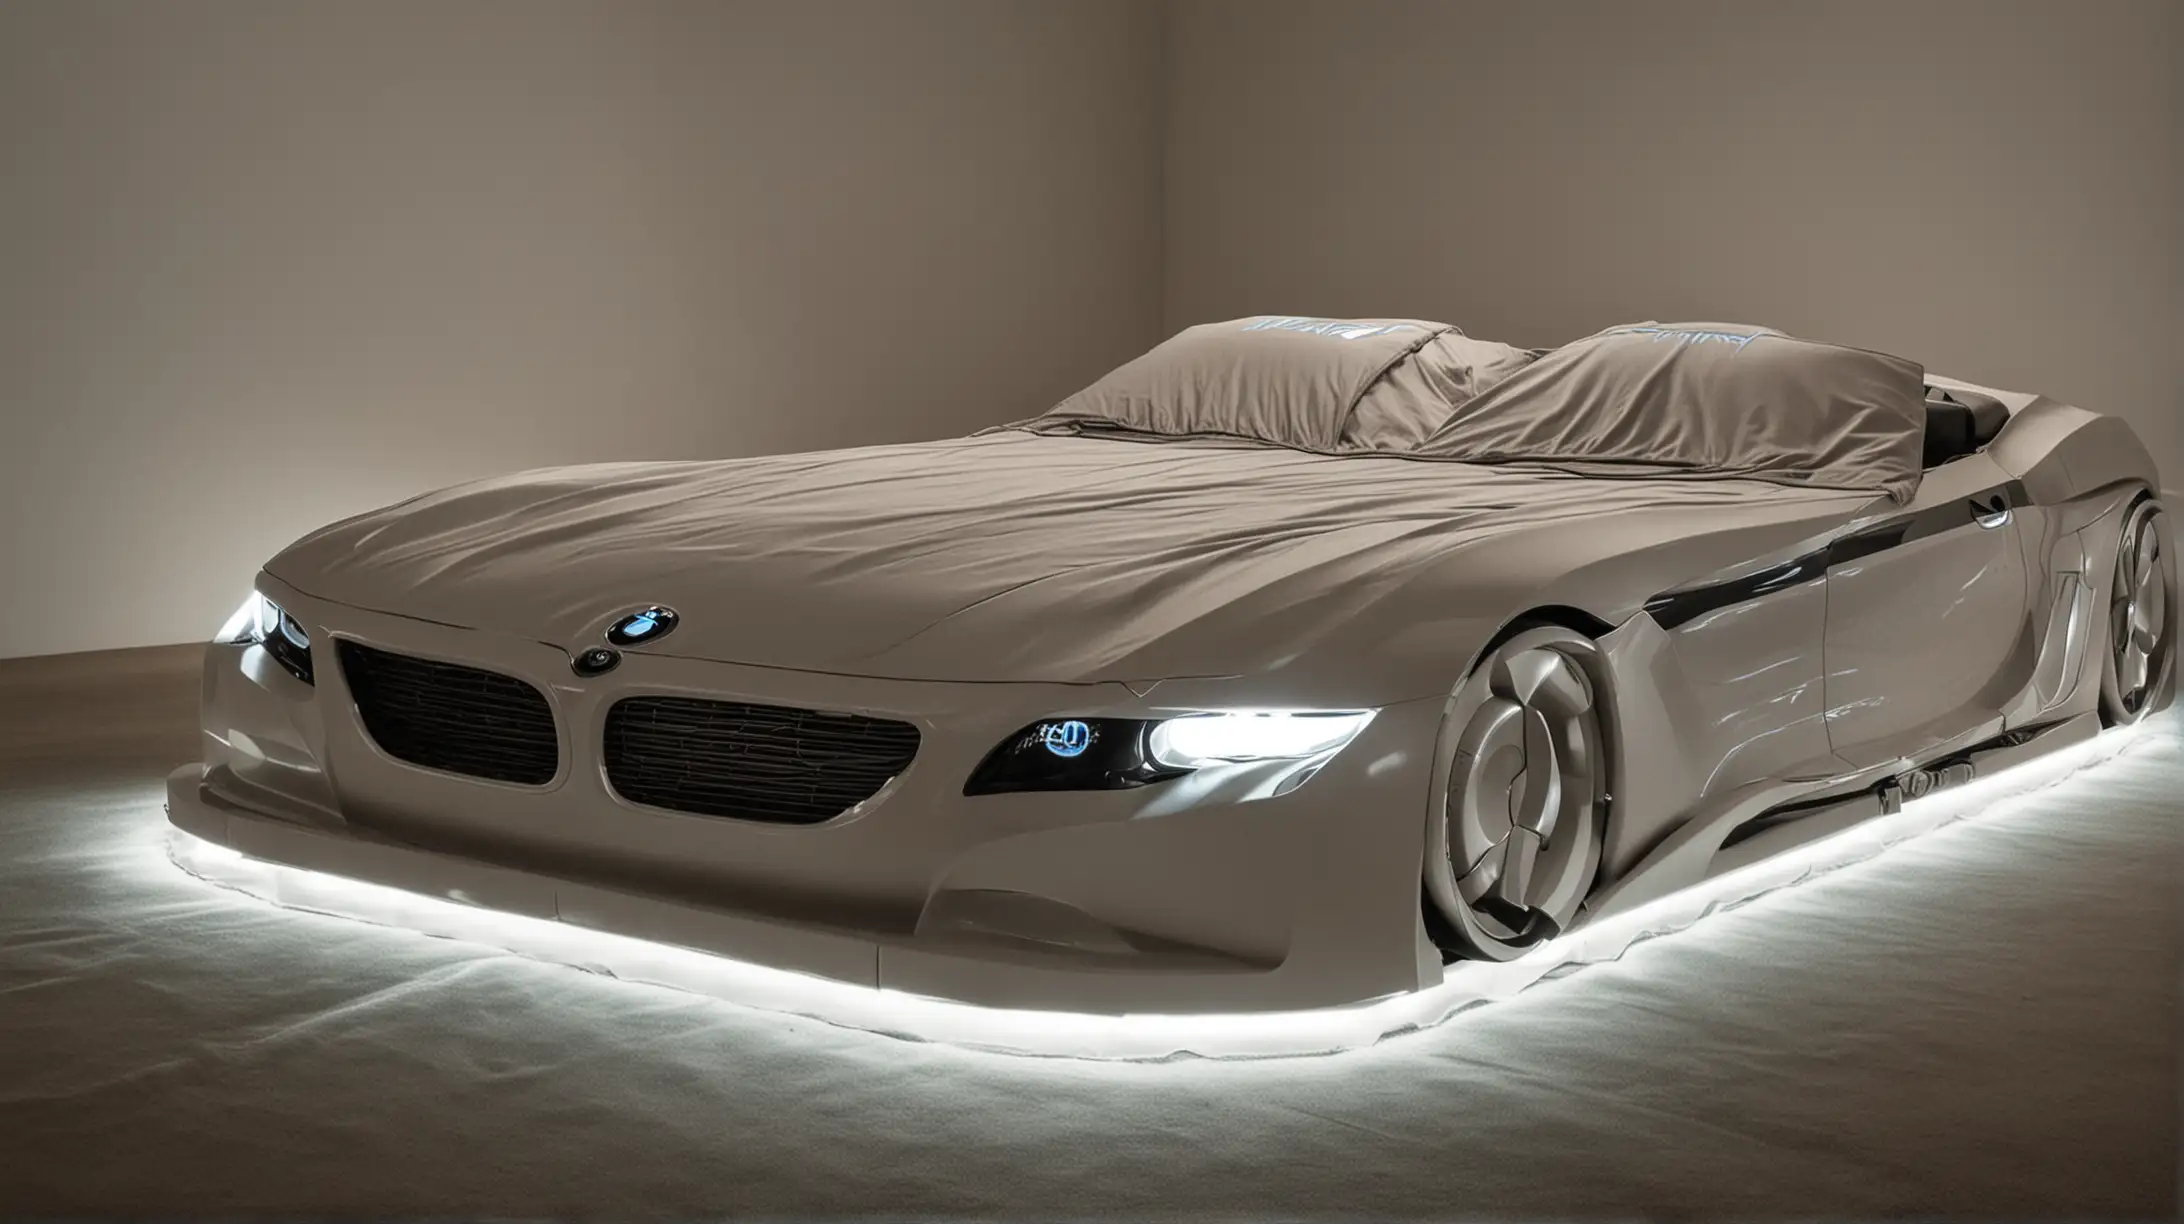 BMW Car Bed with Headlights TwoBed Design for Kids Room